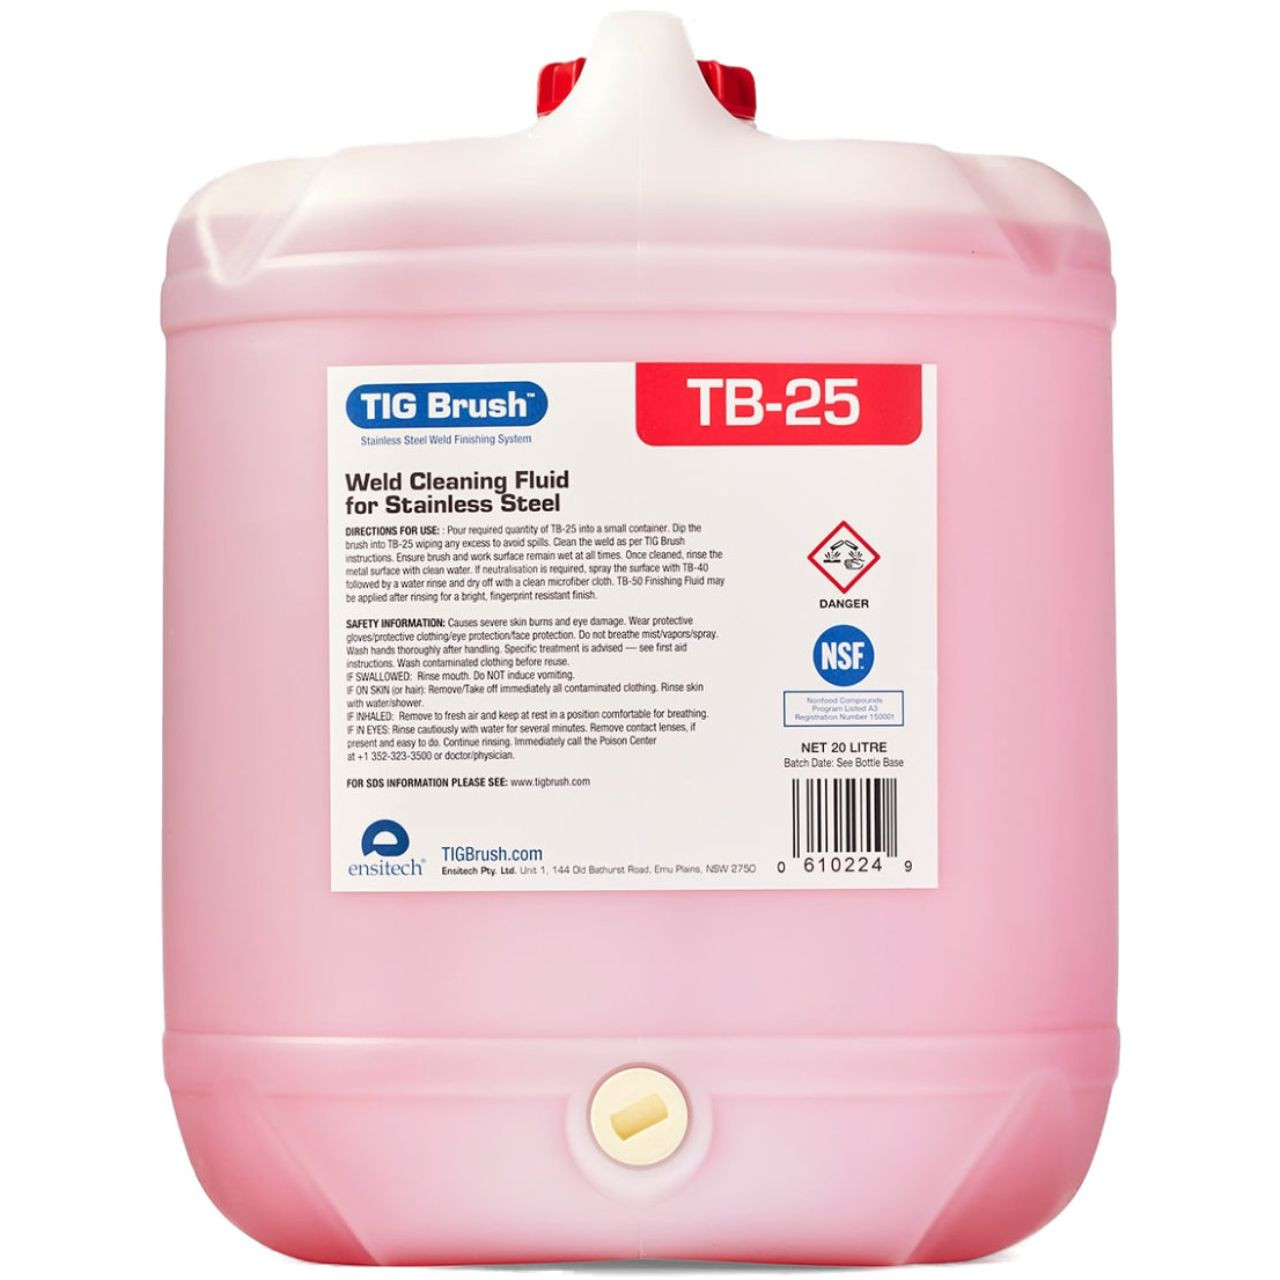 Tig Brush TB-25 Weld Cleaning Fluid 20 Litre